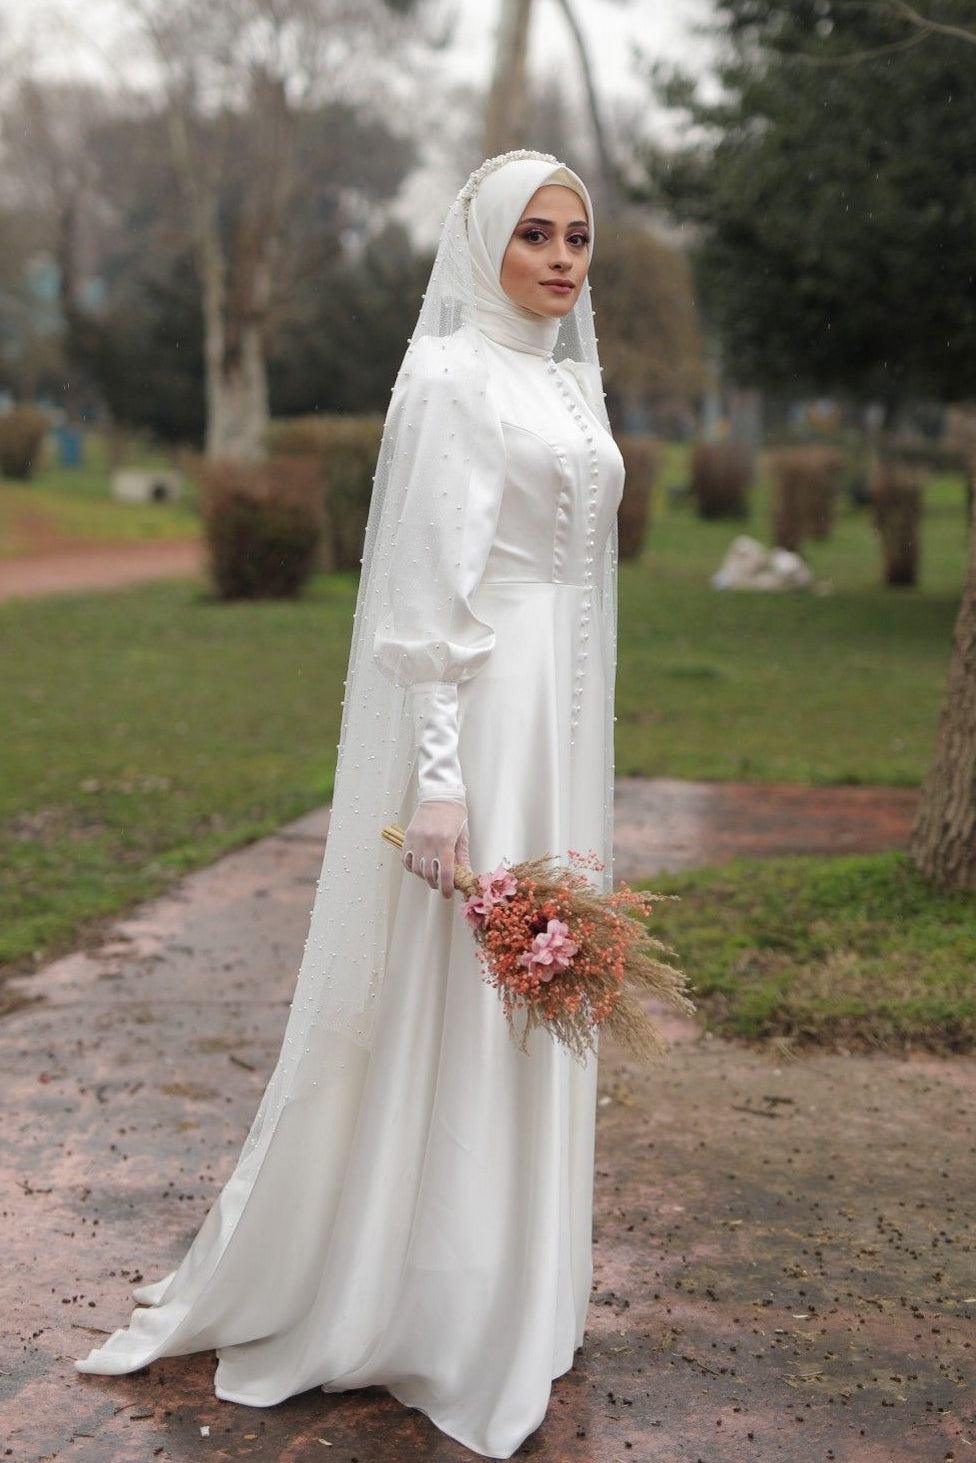 4+3 Dapper Muslim Wedding Dress Ideas for the Brides and Grooms